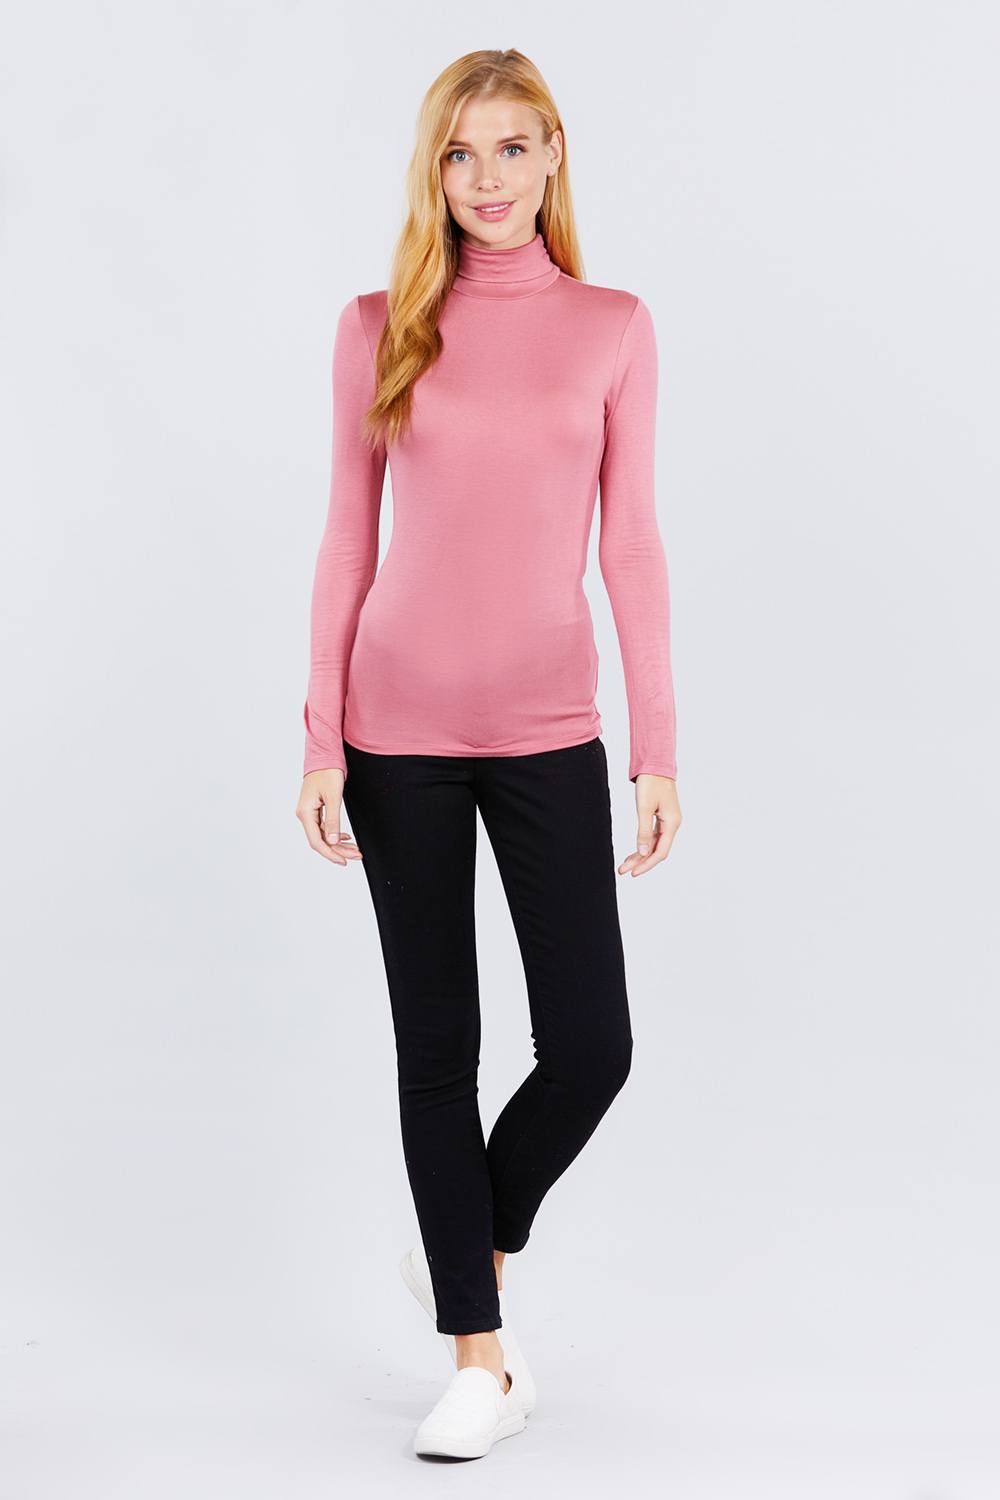 Turtle Neck Rayon Jersey Top